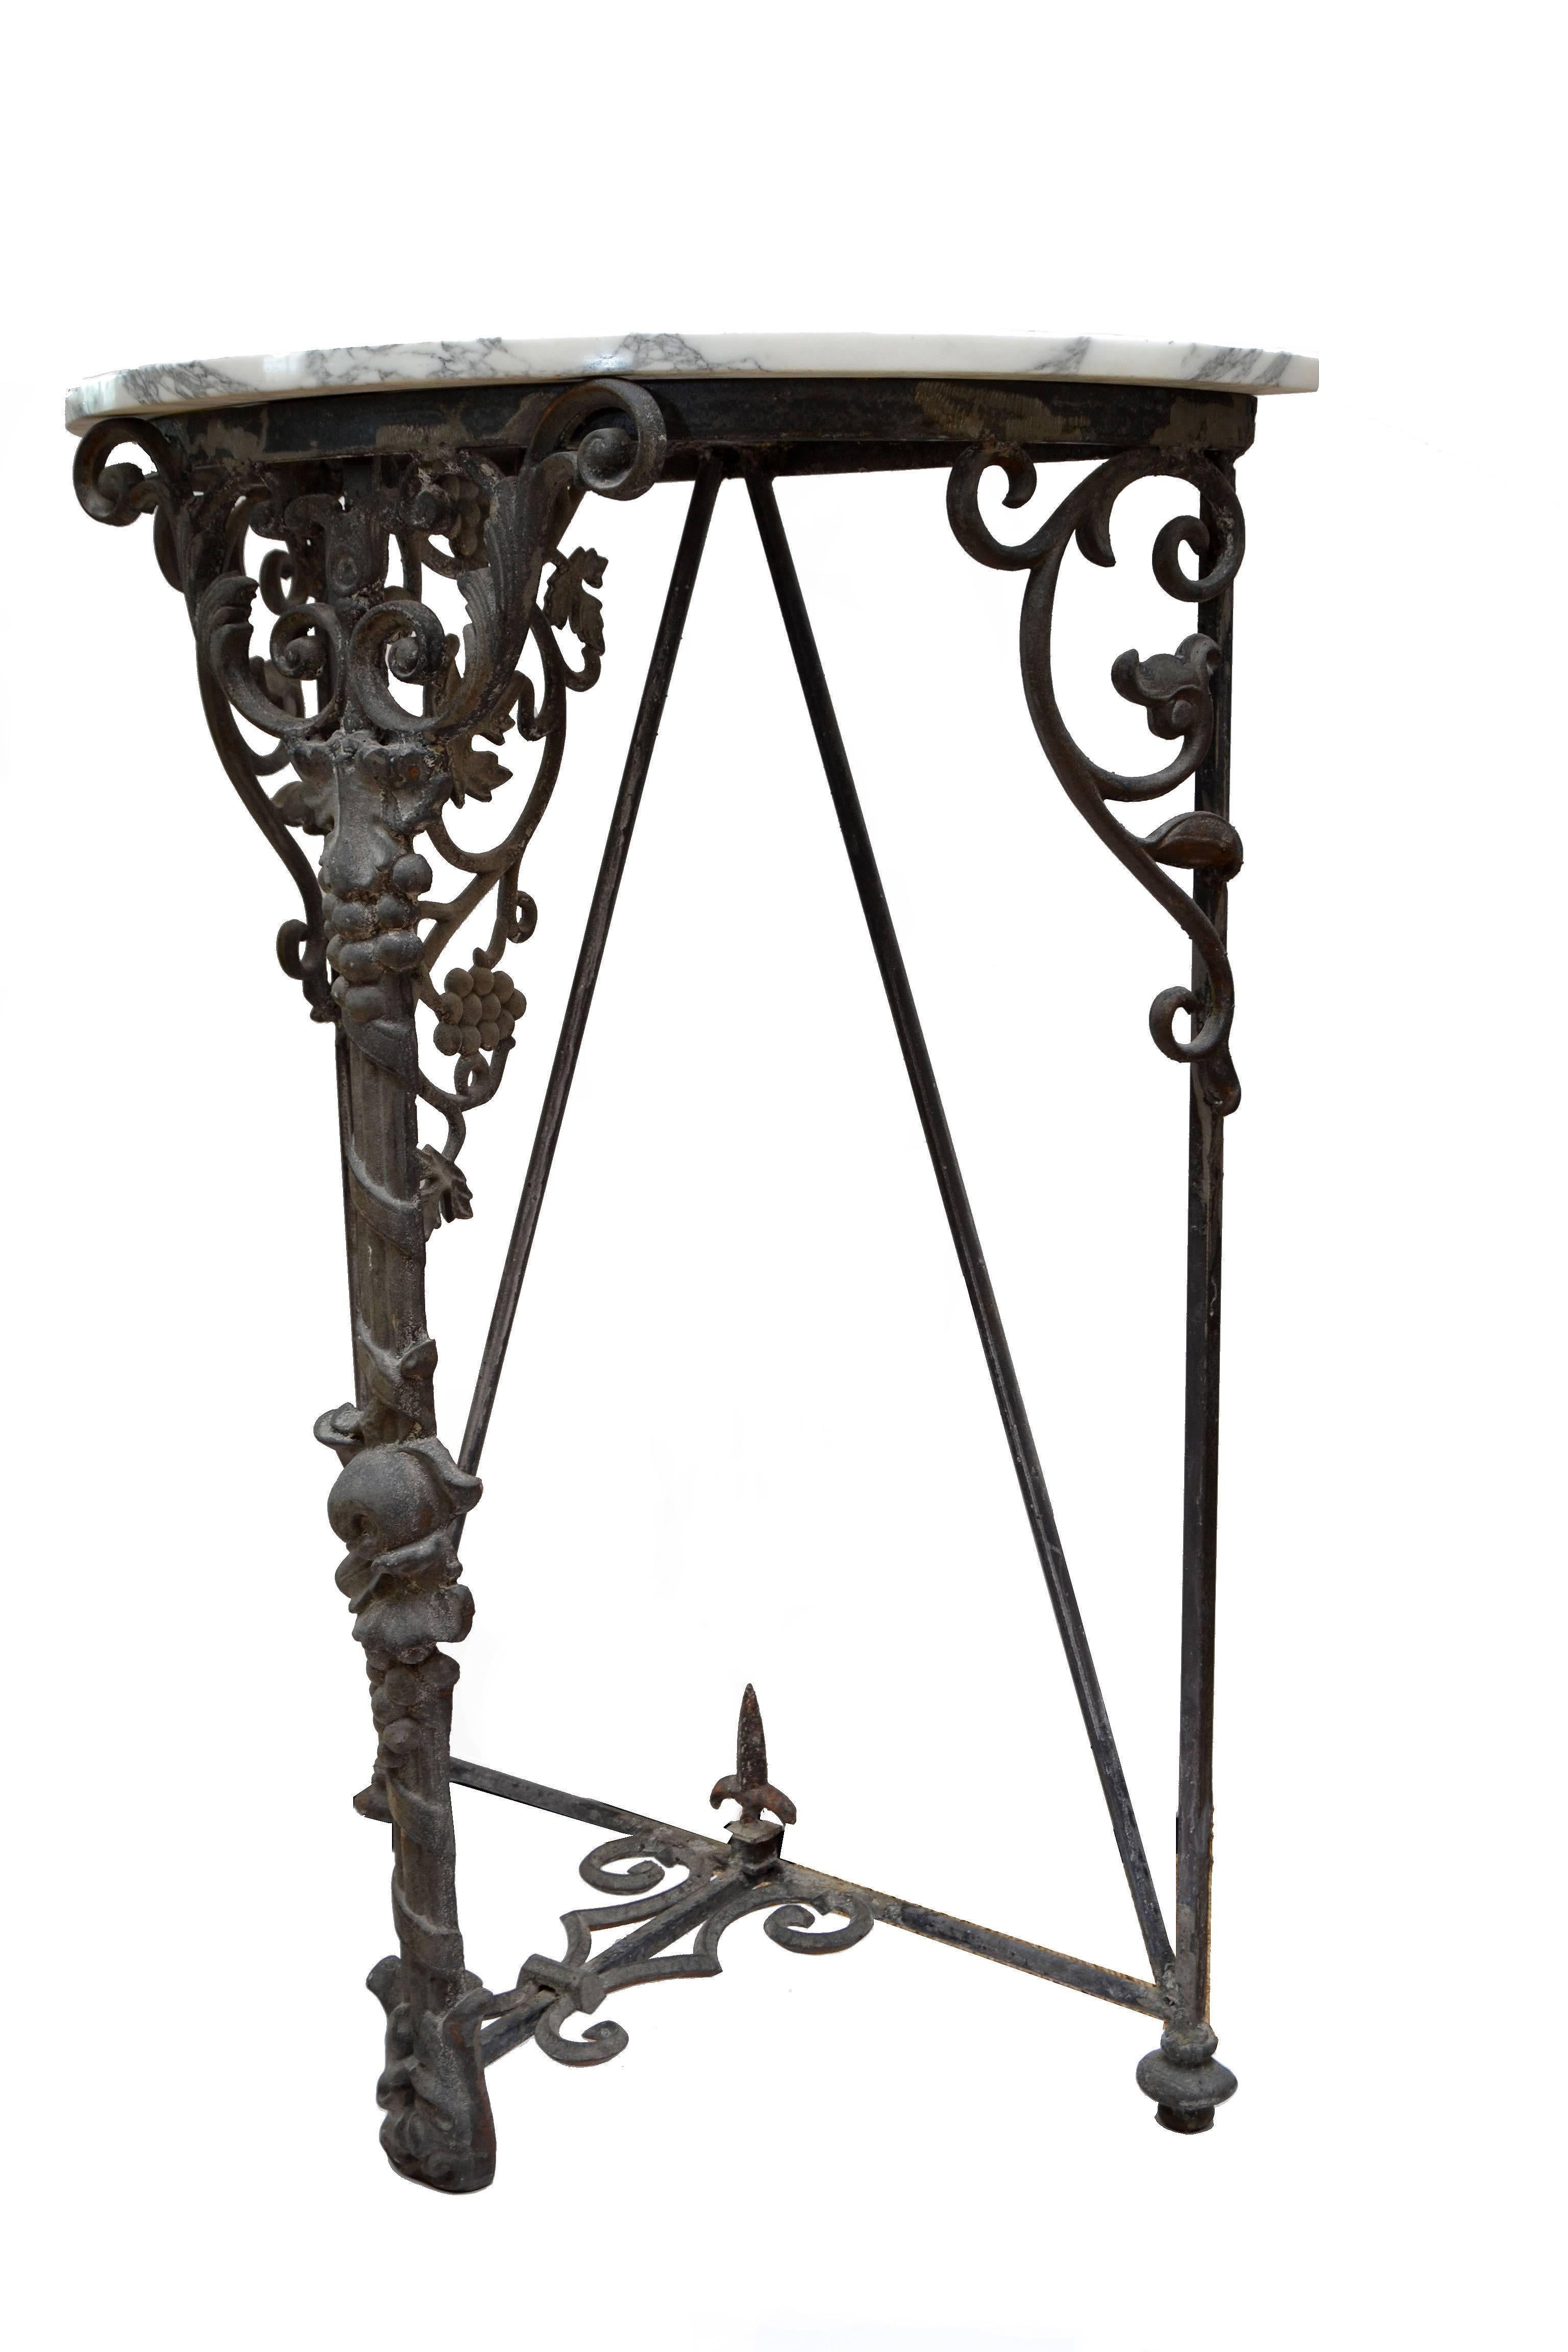 Wrought iron demilune console with marble top.
Featuring grapevines at center front. Perfect for a wine cellar or small patio.
 